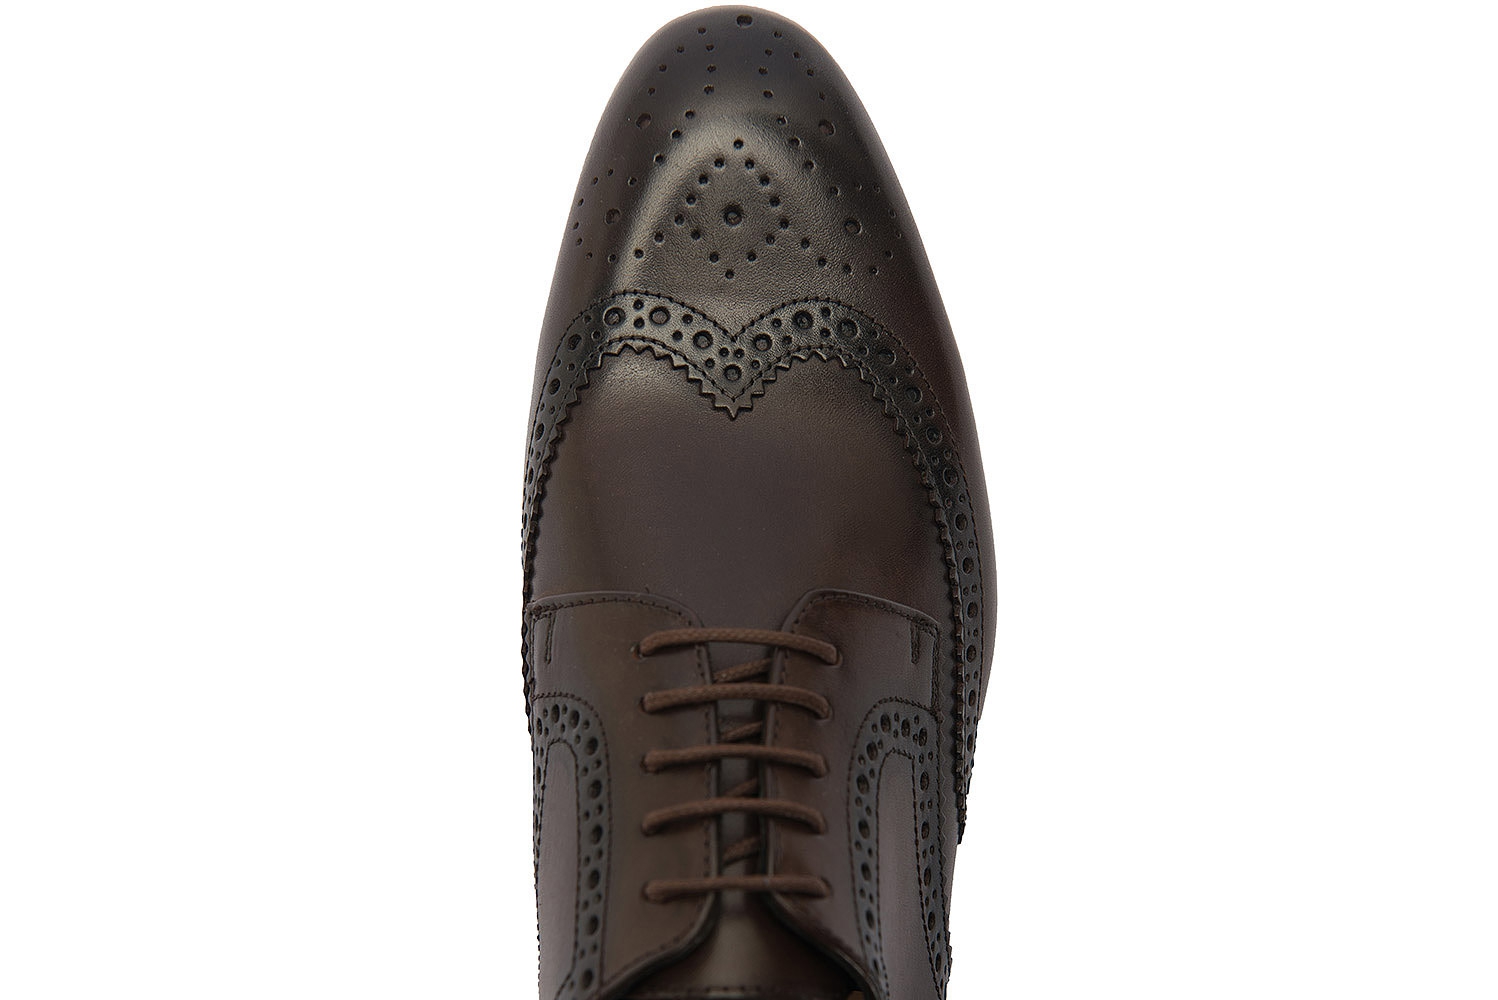 Brown Genuine leather Shoes 3